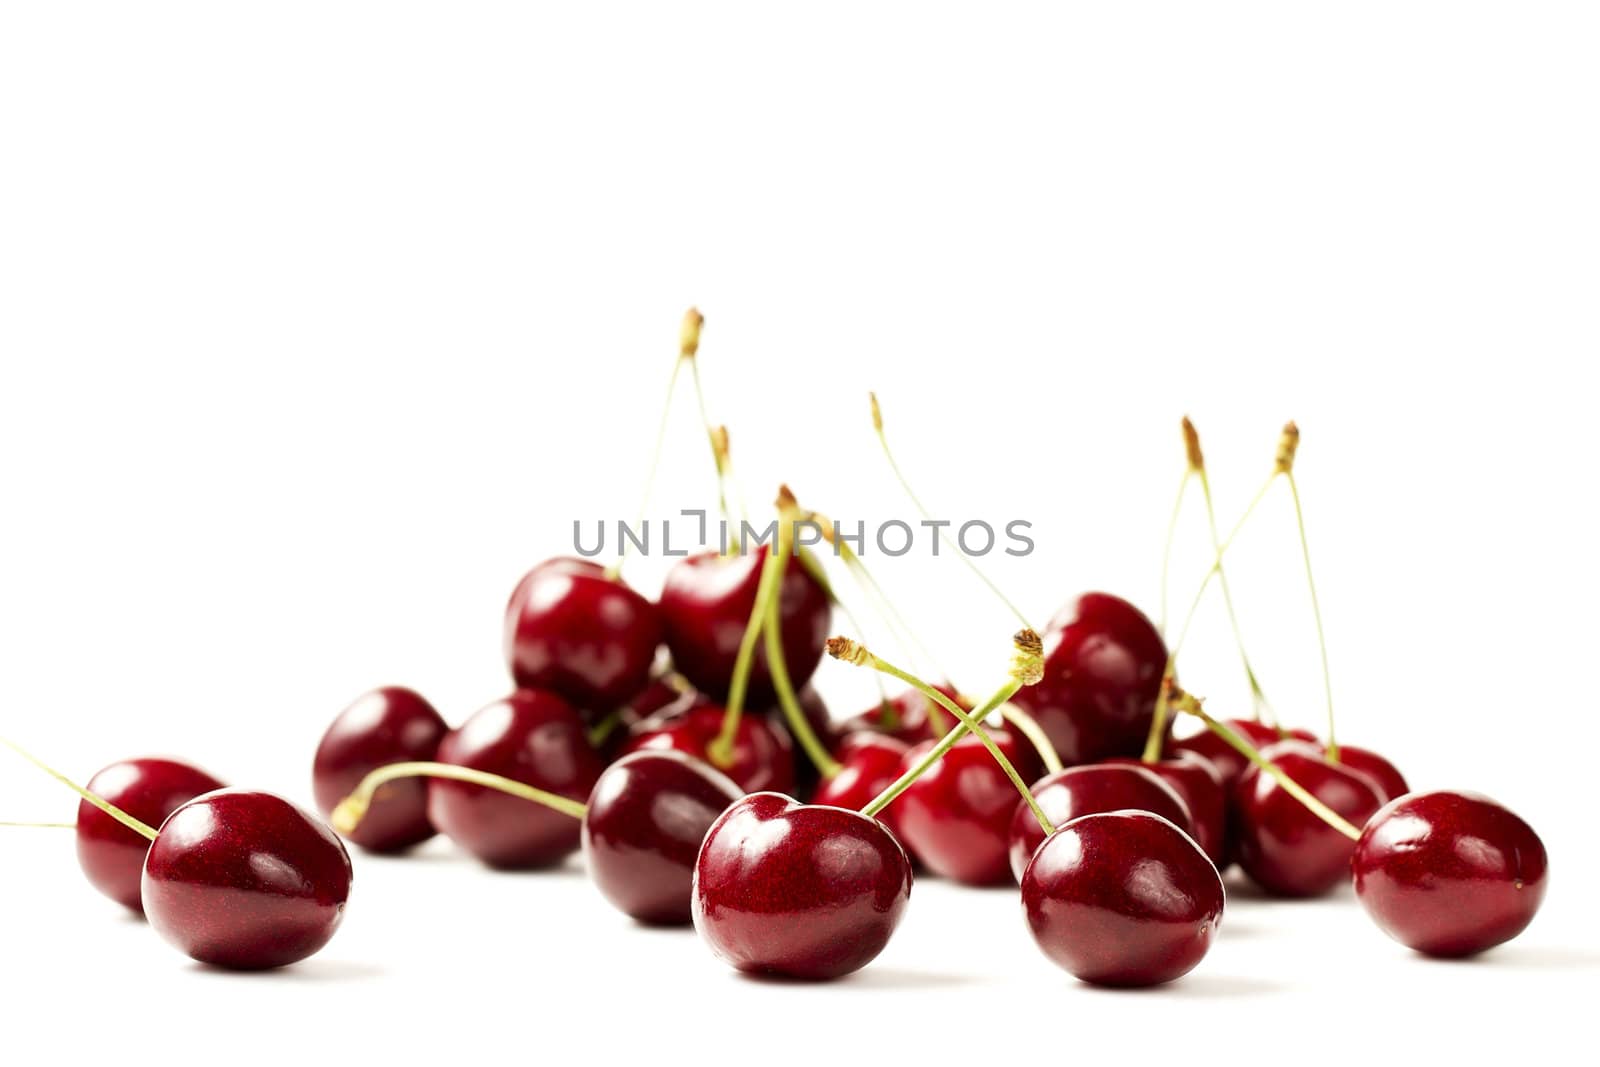 some cherries by RobStark